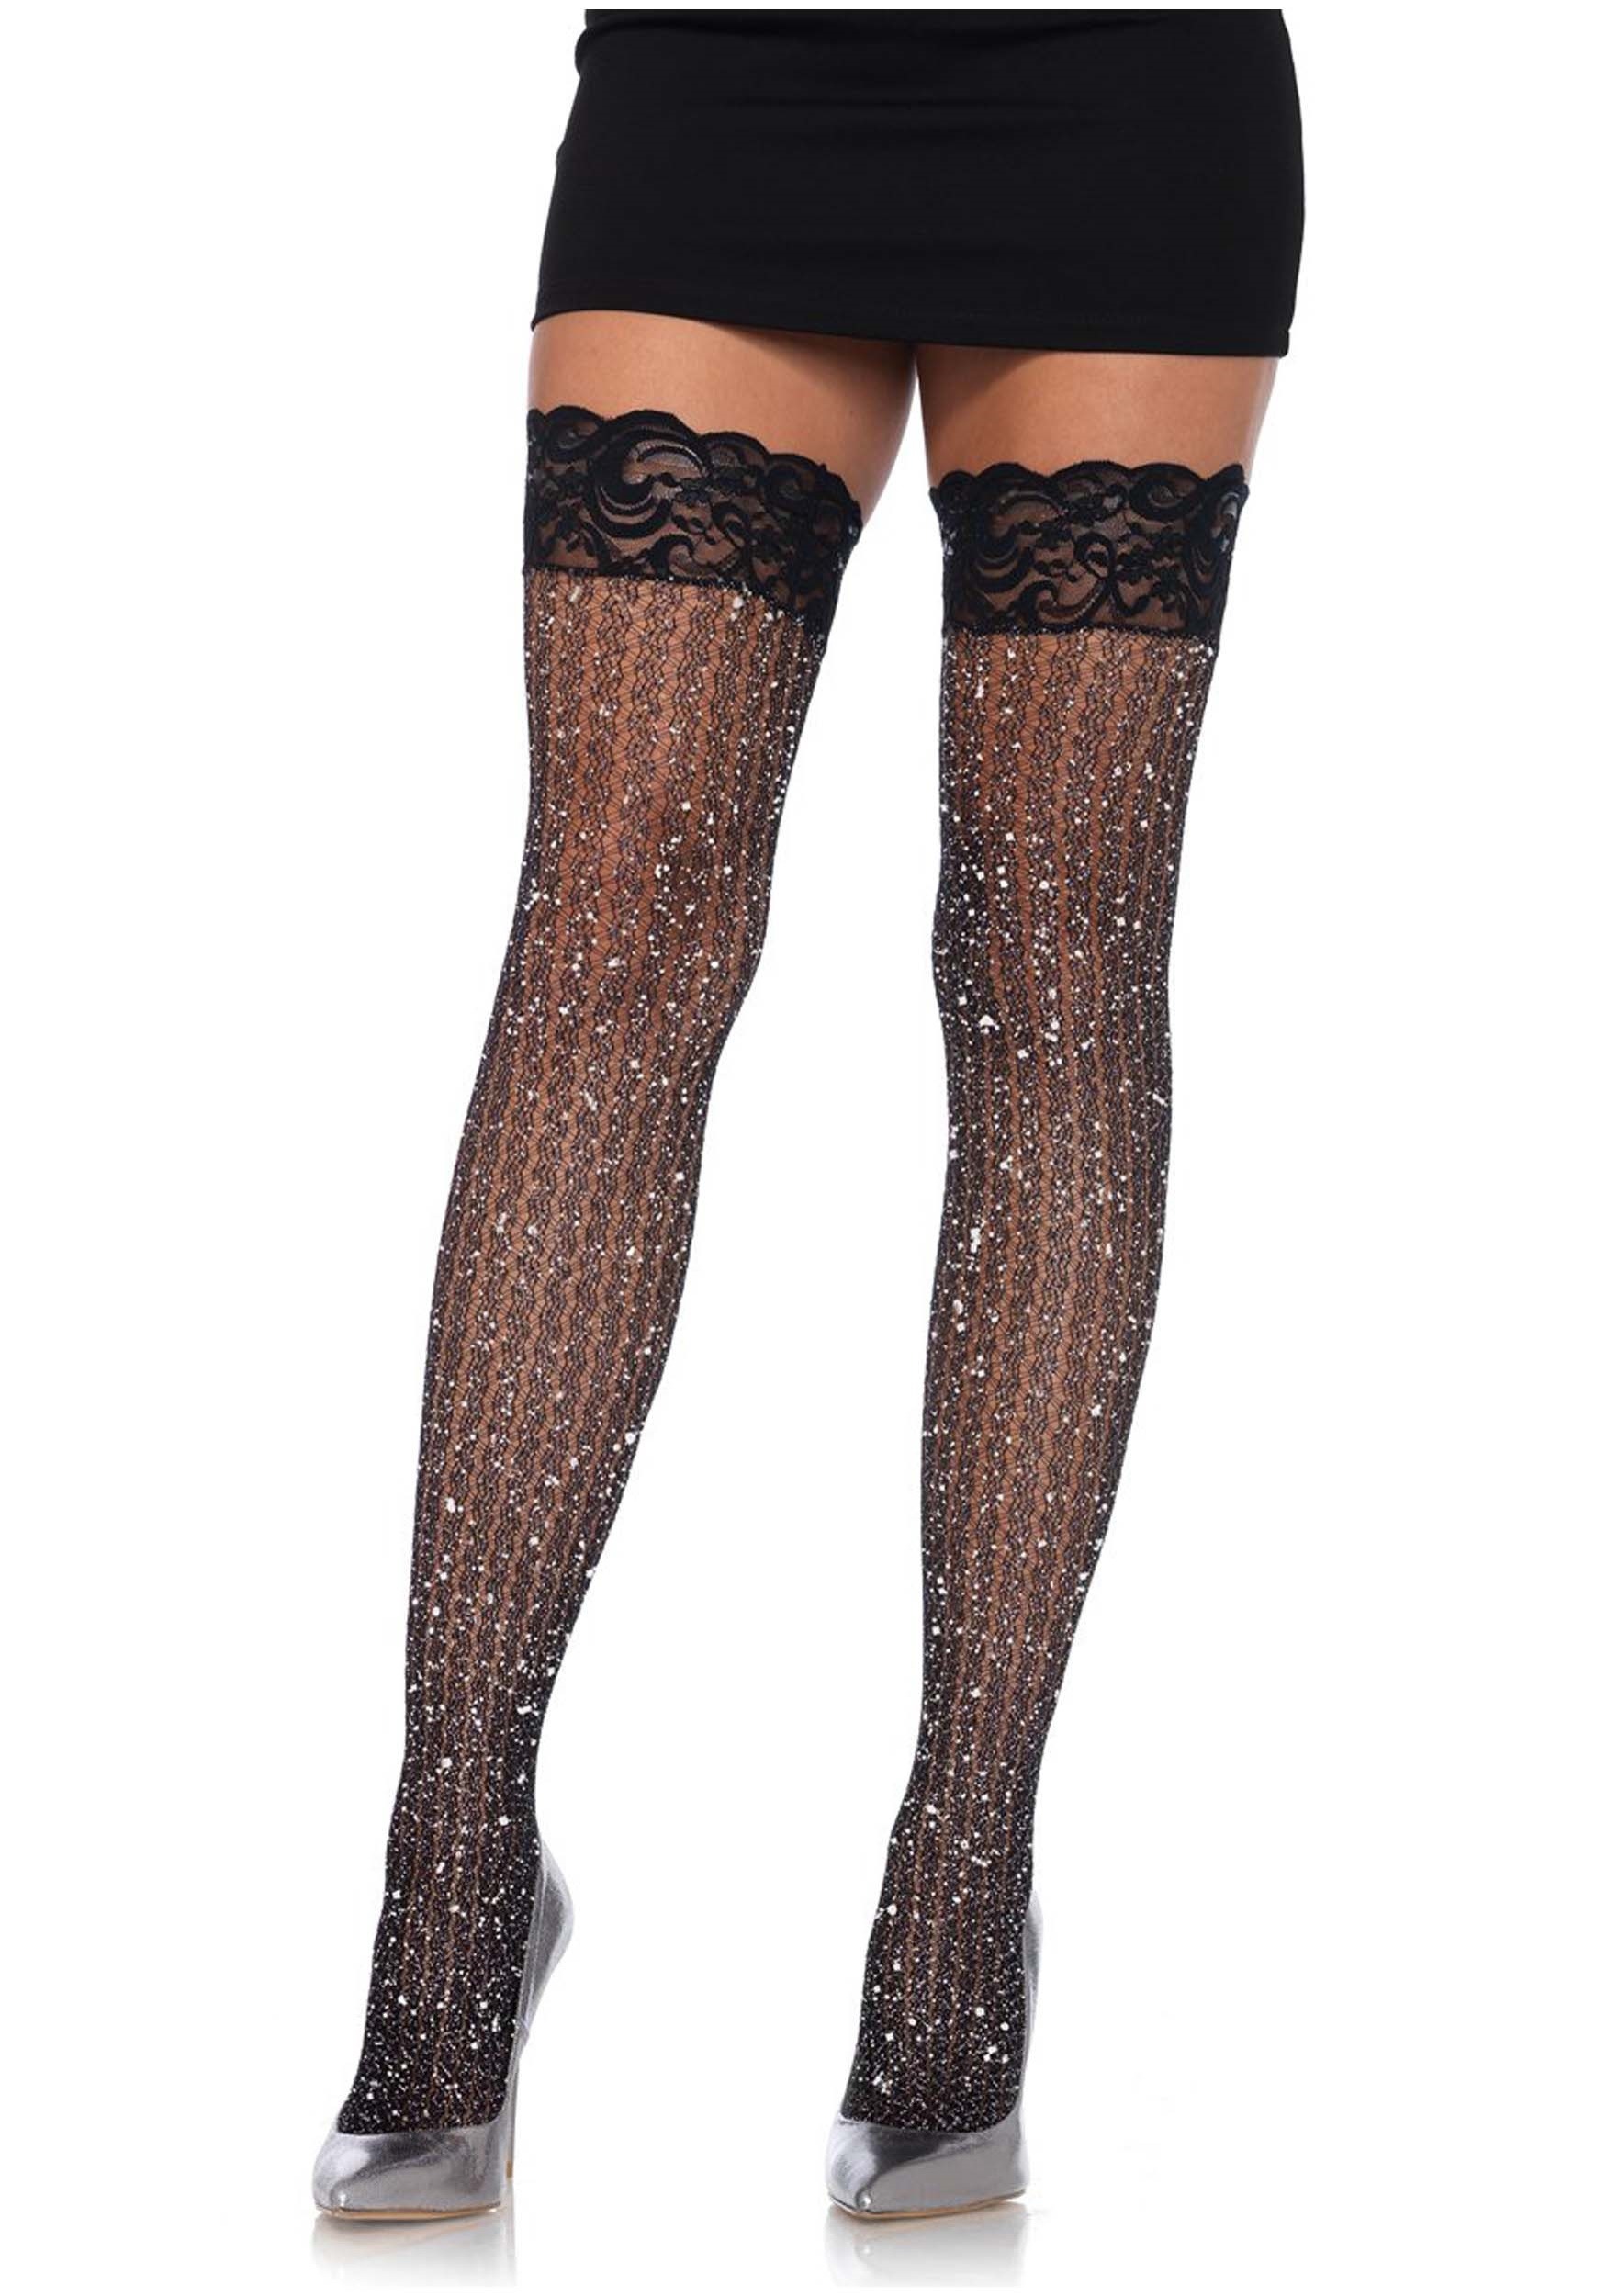 Big Diamond Thigh High One Size Fits Most Womens Big Diamond Thigh Highs